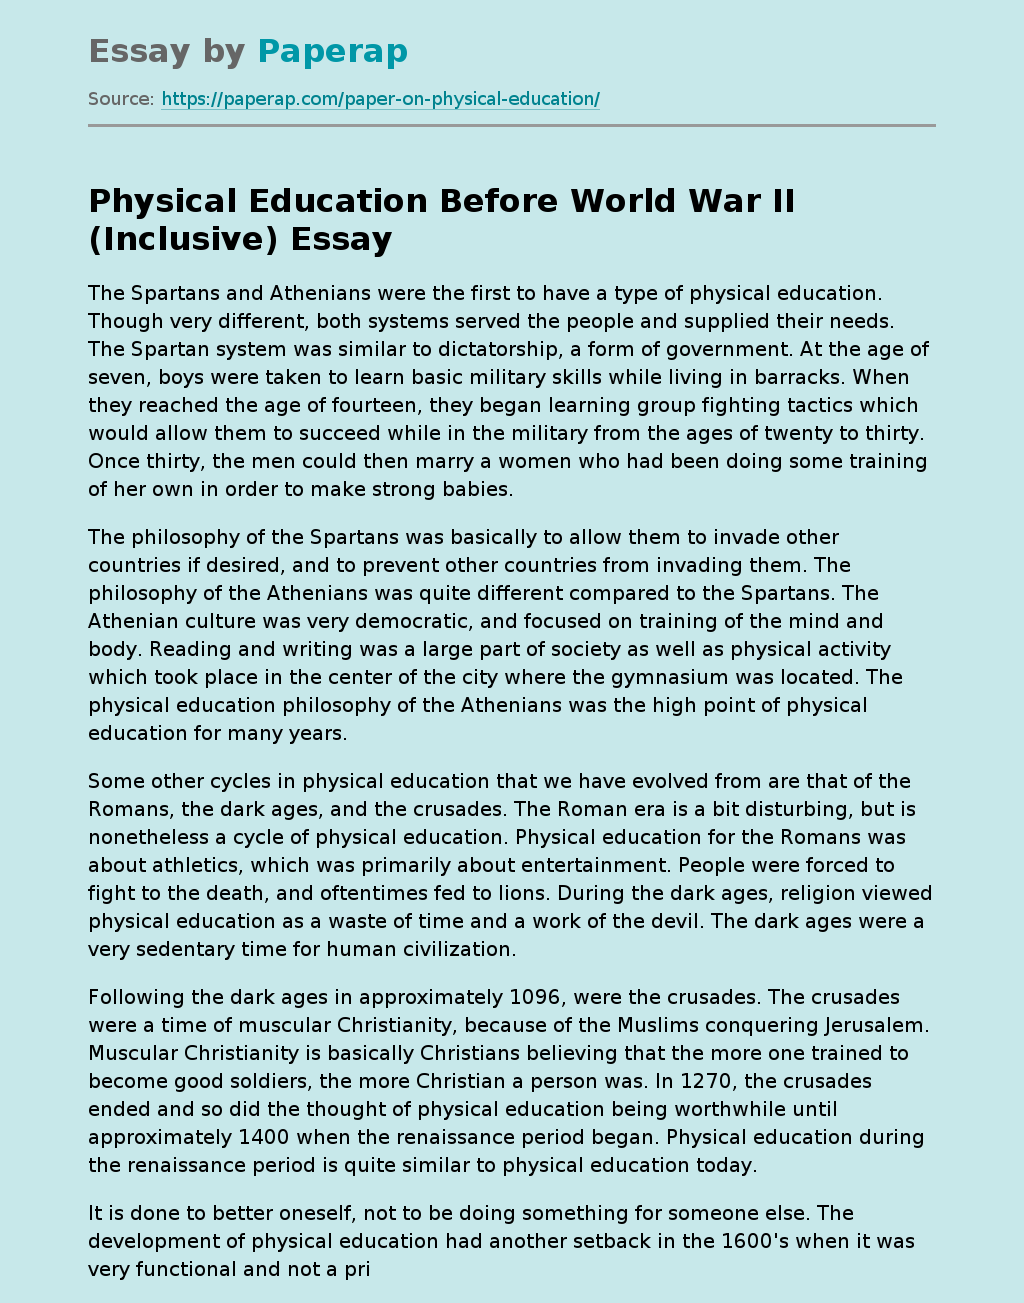 Physical Education Before World War II (Inclusive)